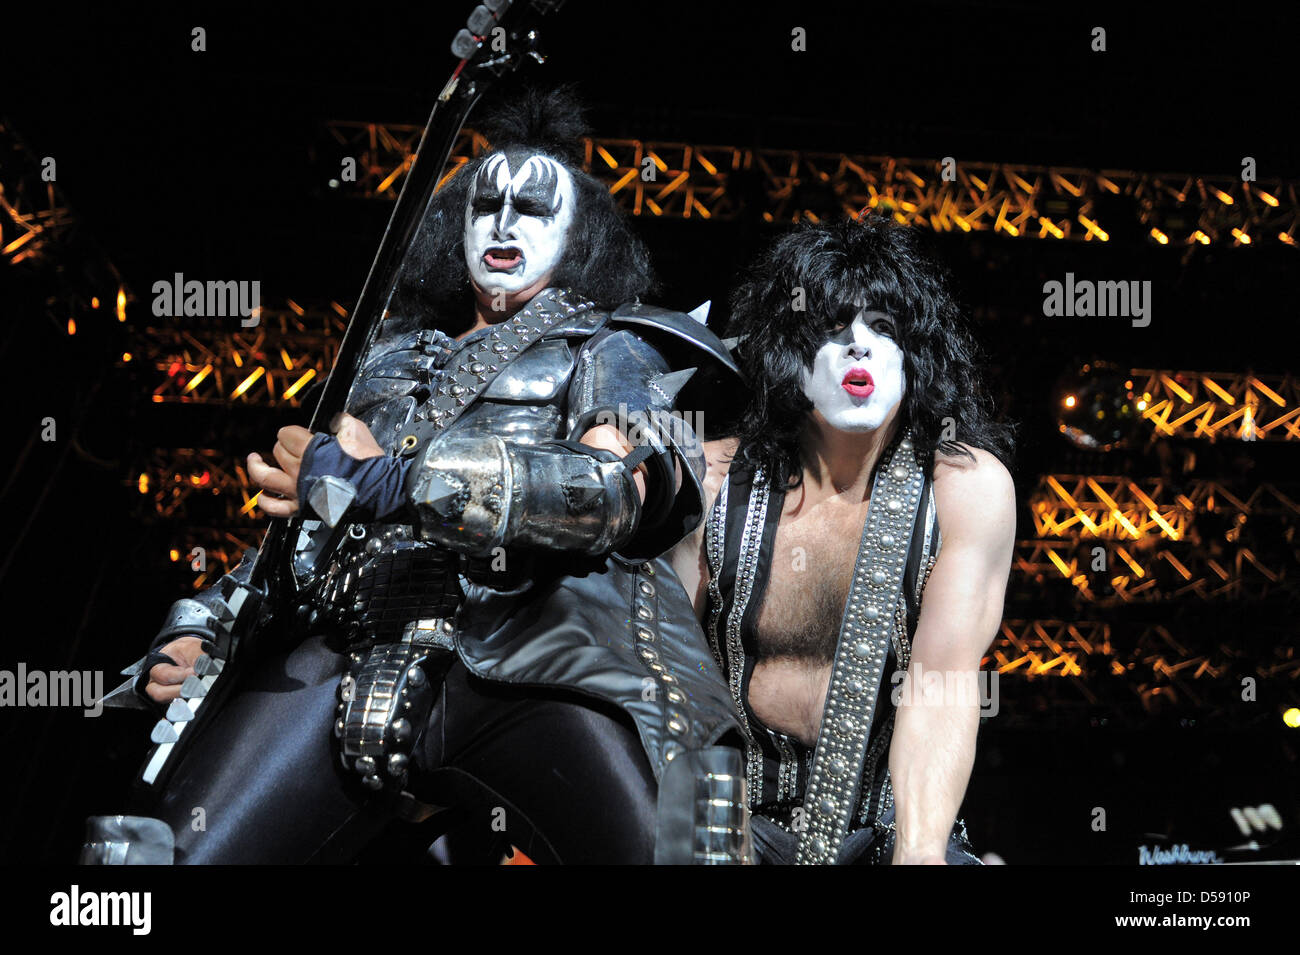 Gene Simmons (L) and Paul Stanley (R) of the rock band 'Kiss' perform during the rock music festival 'Rock am Ring' at the Nuerburgring, Germany, 03 June 2010. About 90 bands perform on three stages between 03 and 06 June 2010. Photo: Harald Tittel Stock Photo